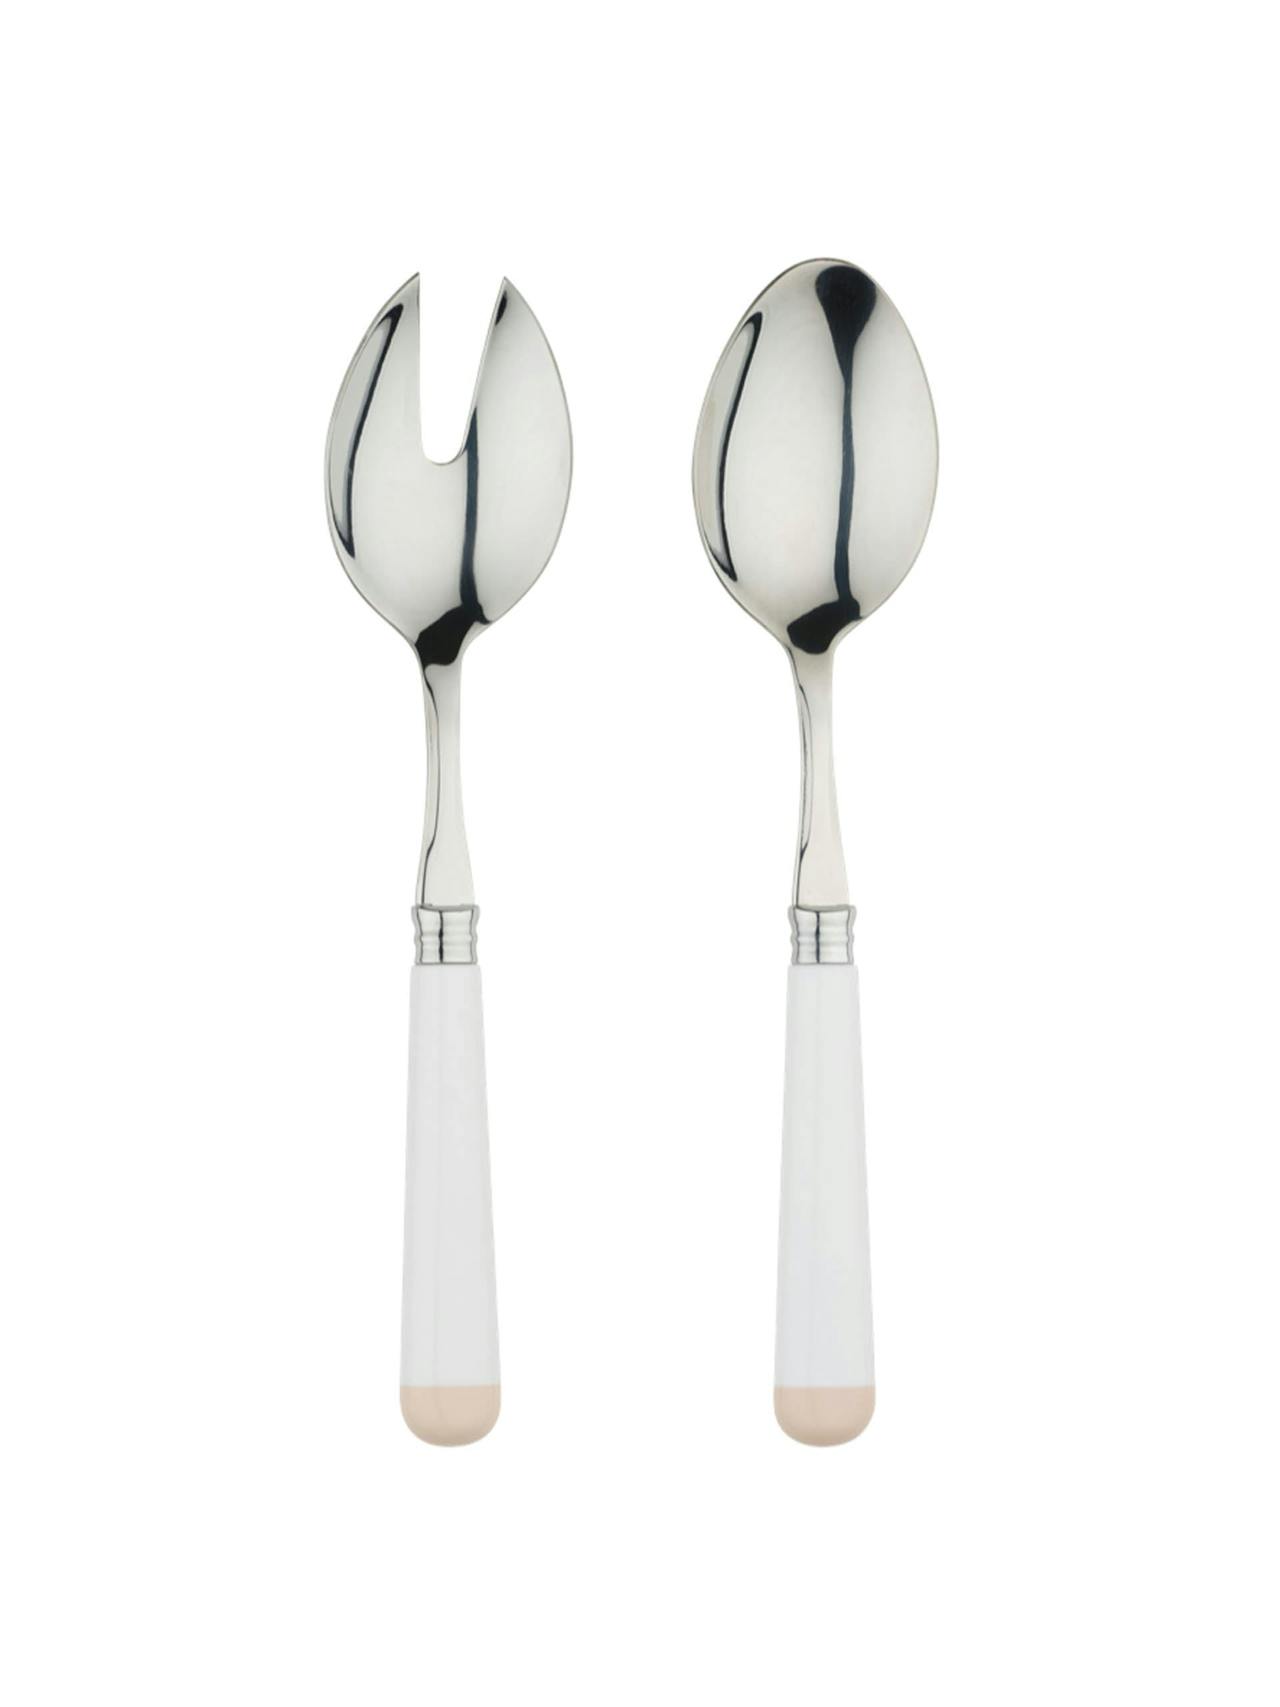 White and beige salad servers